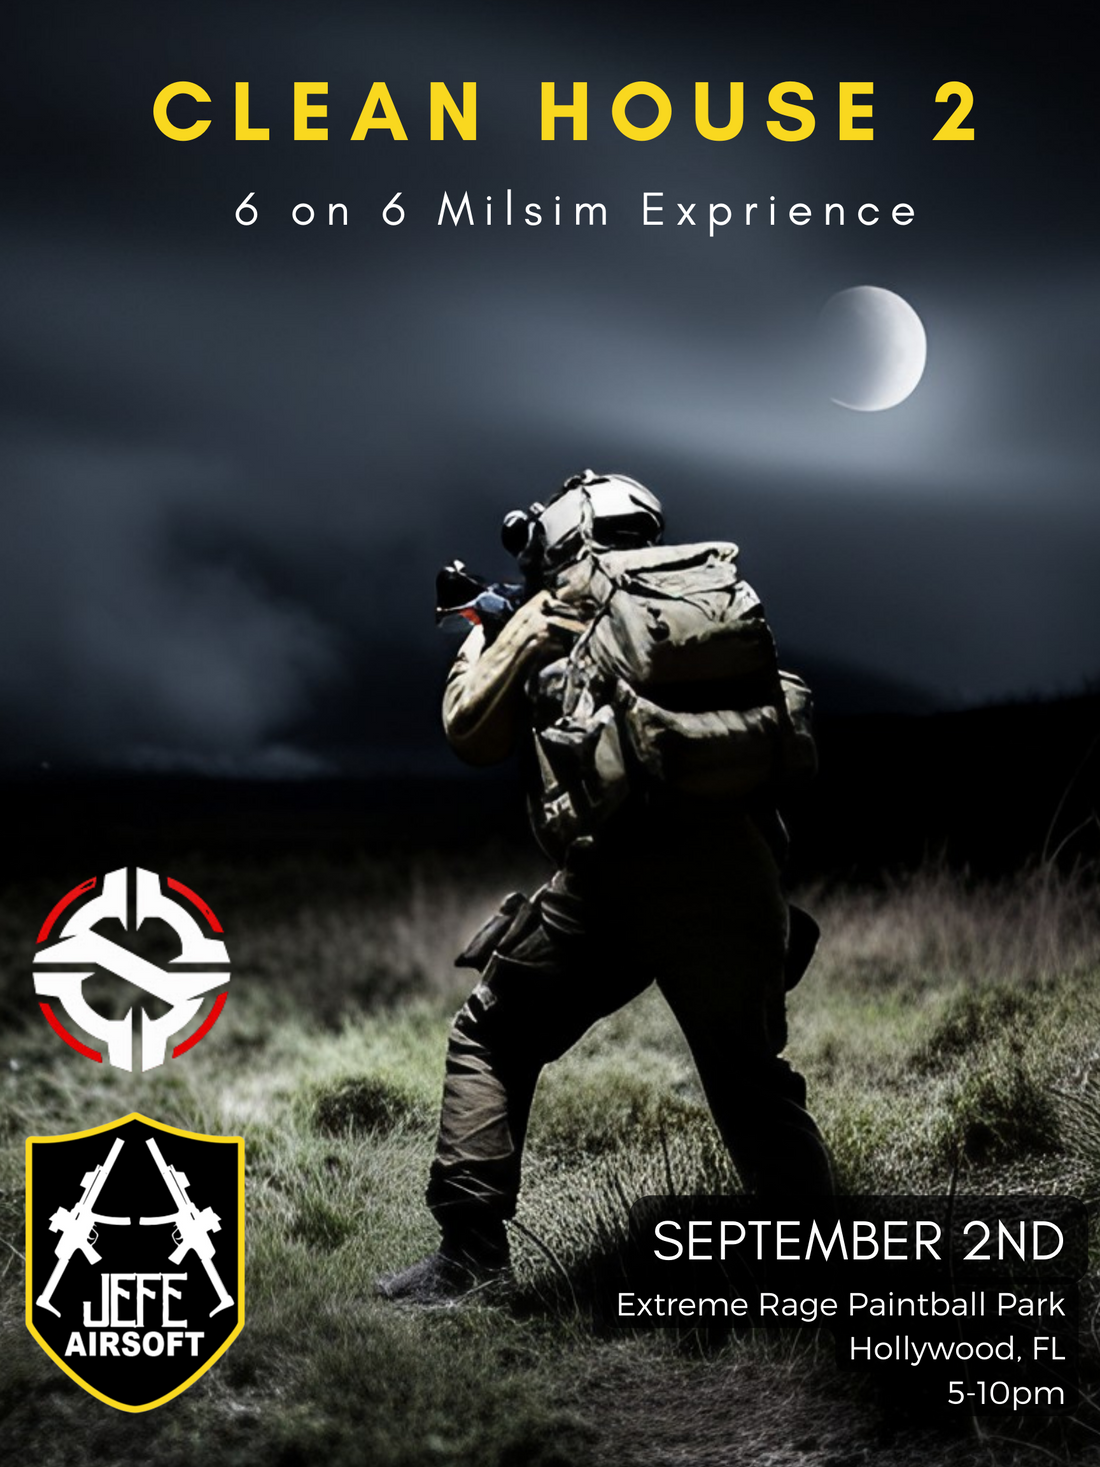 Revolutionizing Airsoft with Operation Clean House 2 & Skirmesh